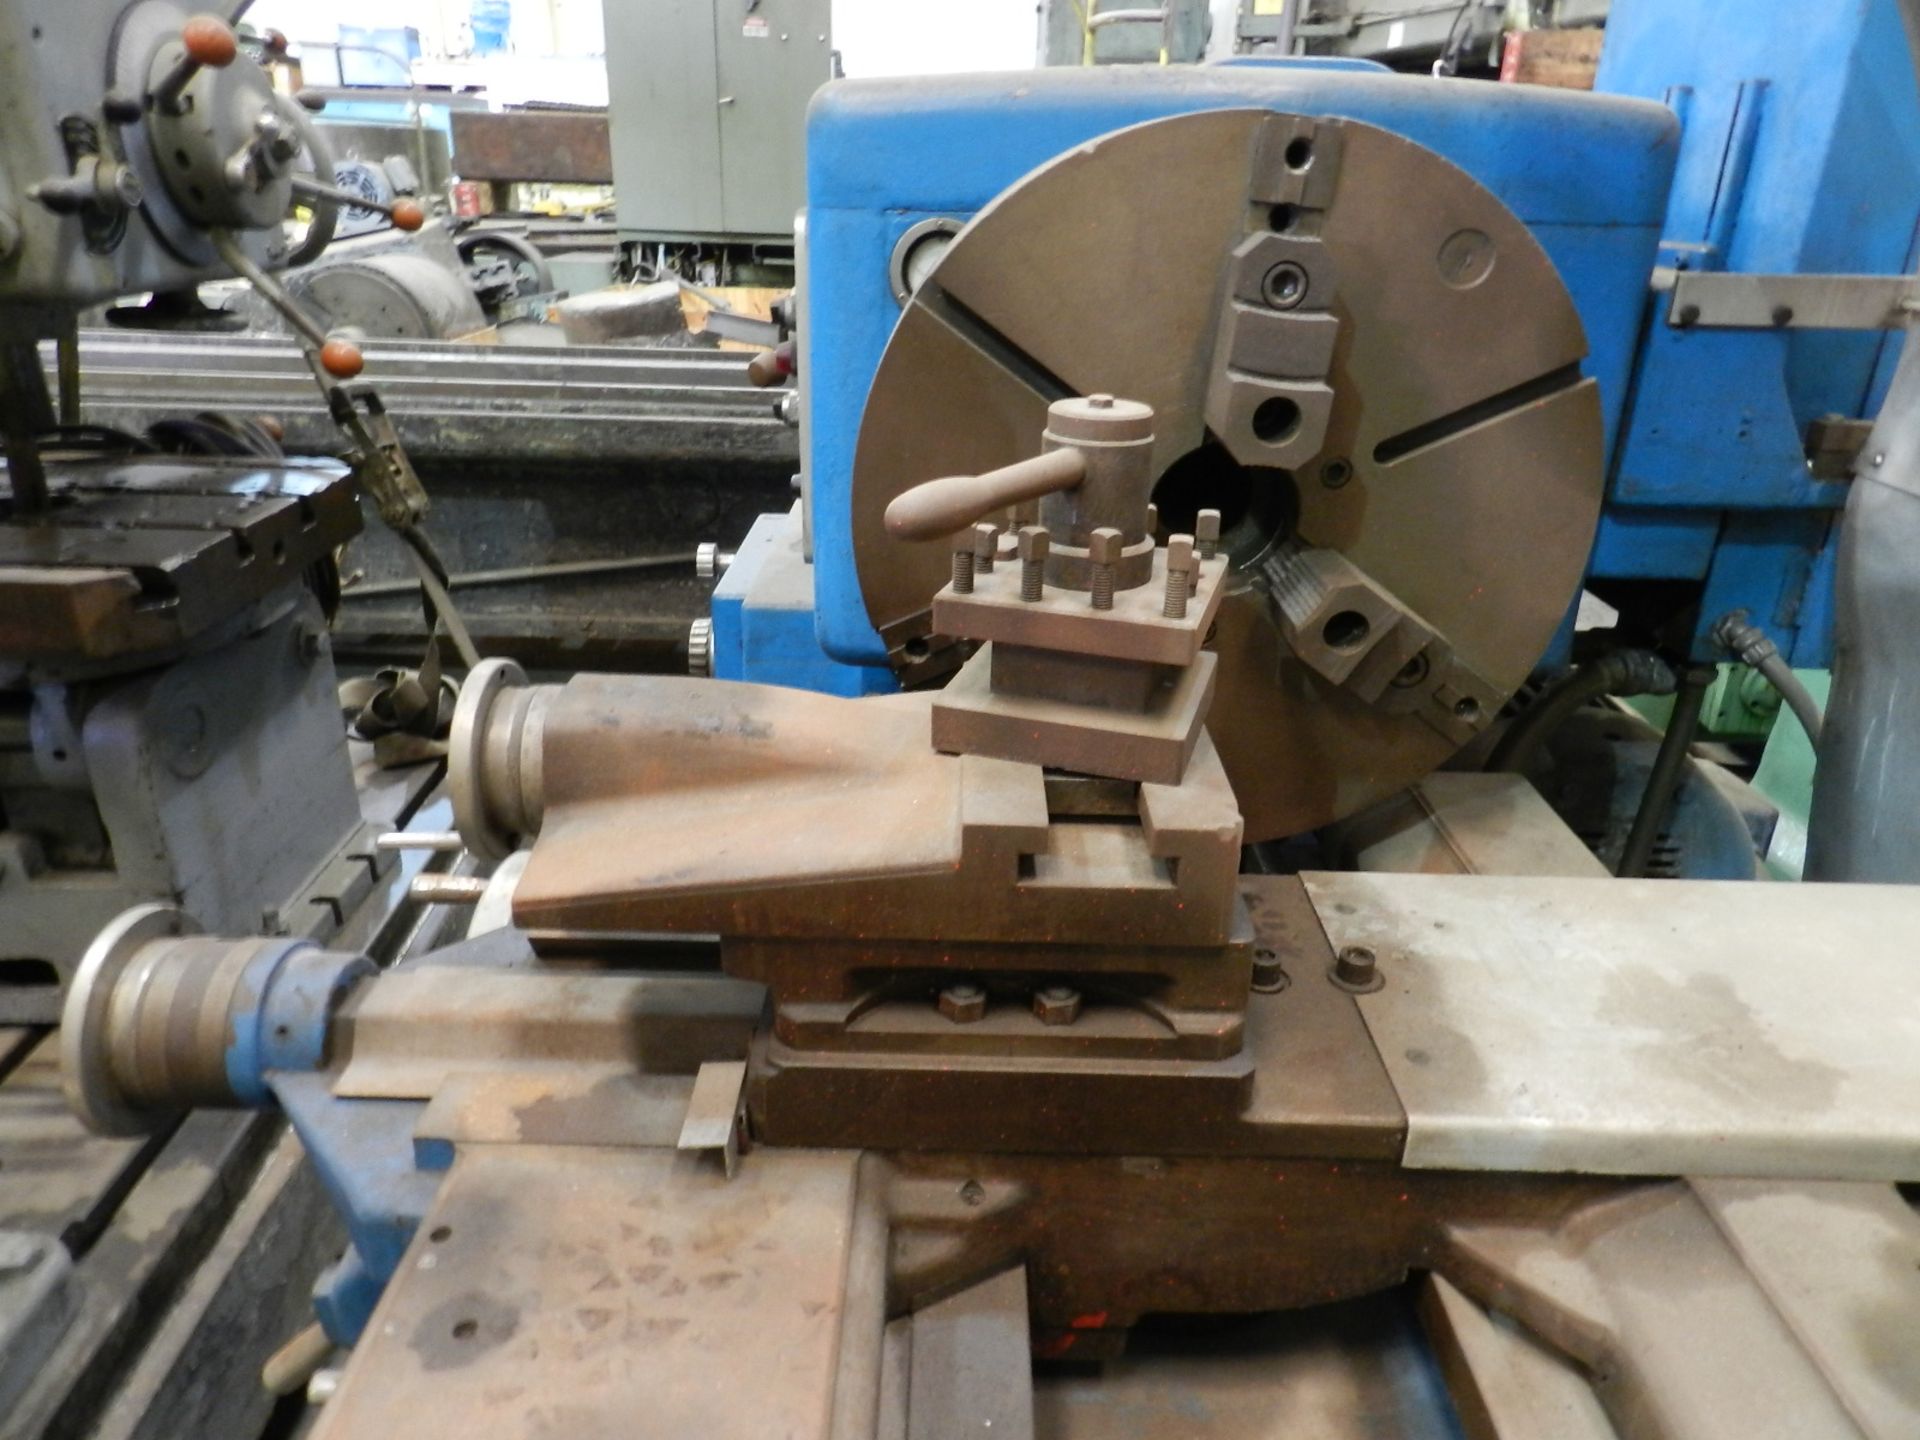 LODGE & SHIPLEY M35 ENGINE LATHE, 96" BETWEEN CENTERS, 21" 3-JAW CHUCK, TAILSTOCK - Image 15 of 16